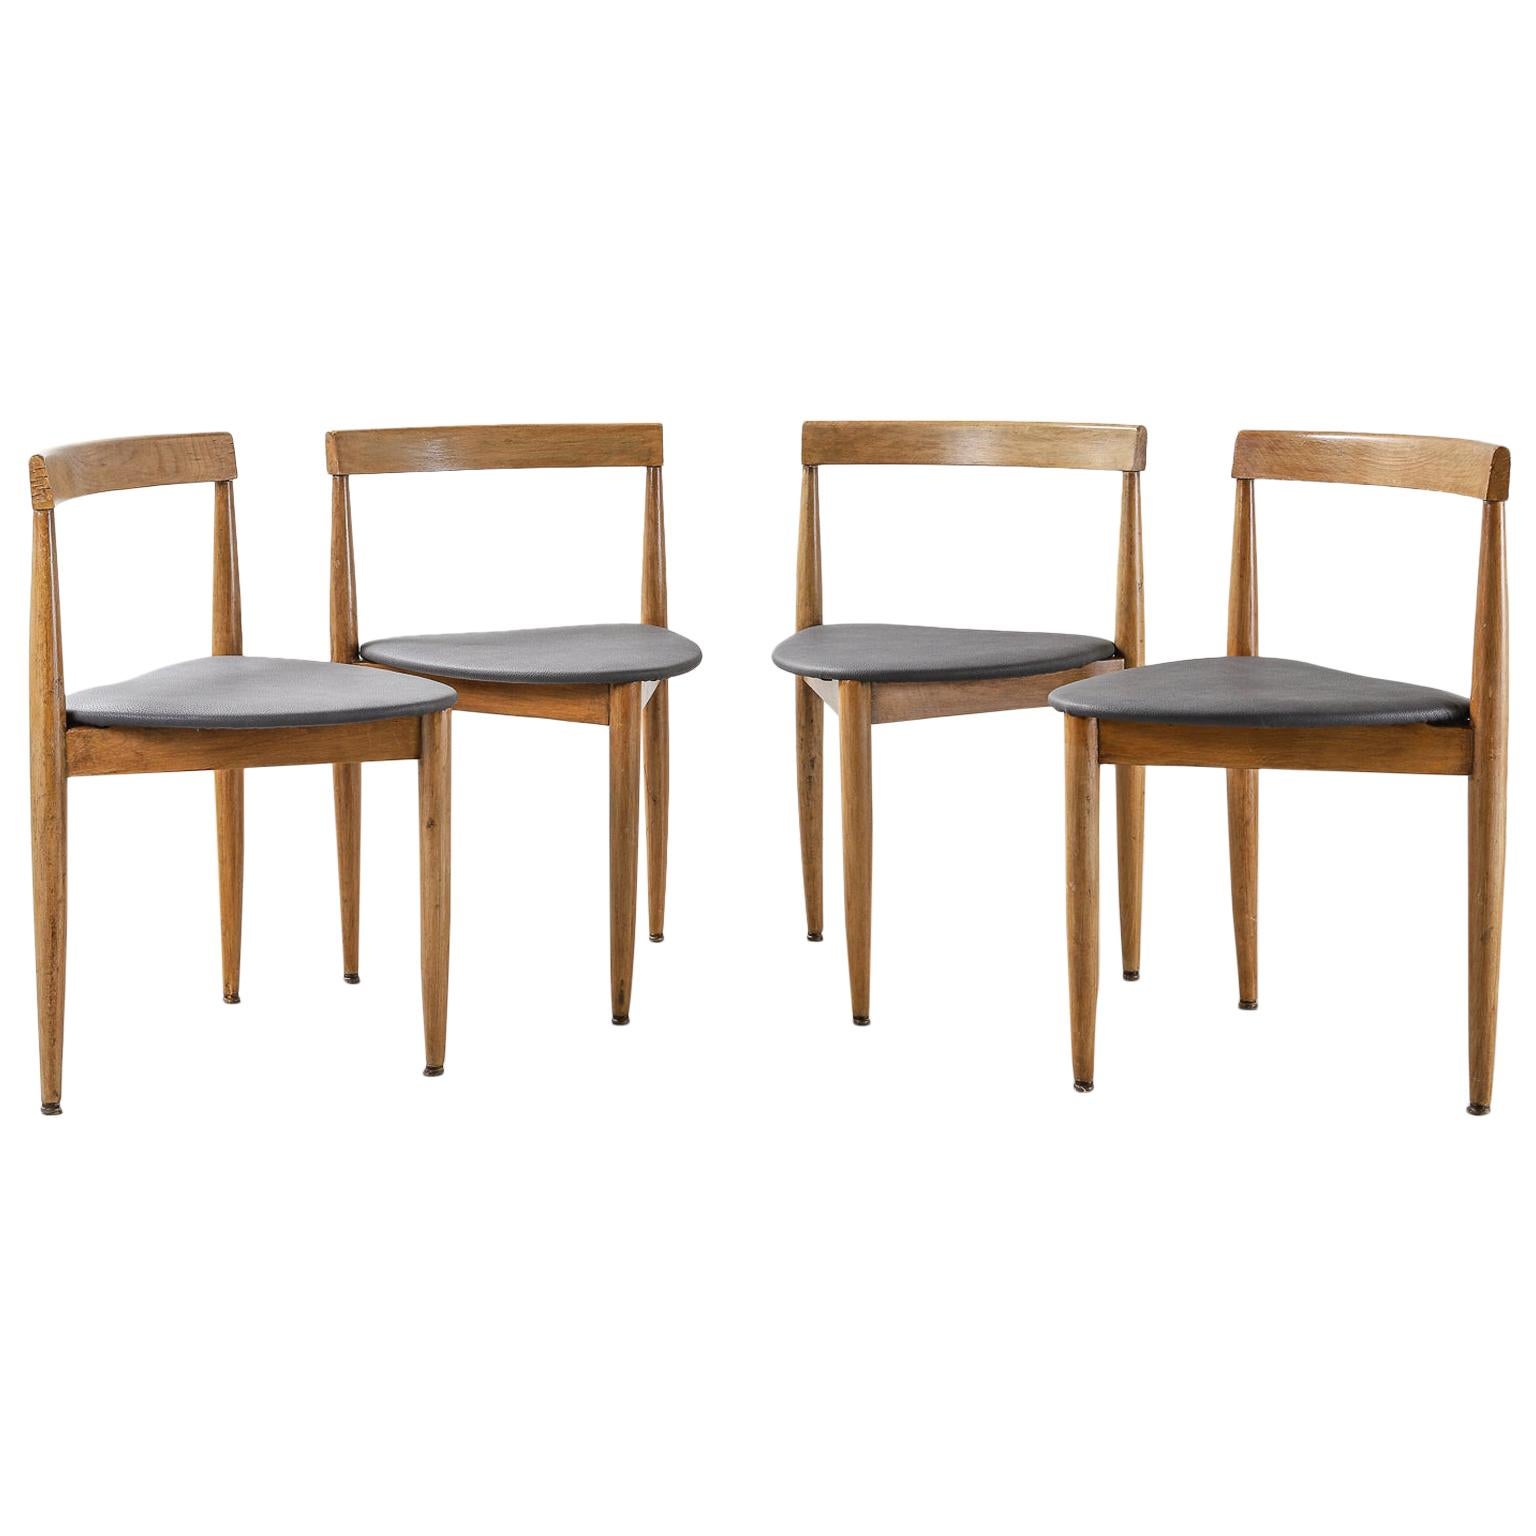 Set of 4 Hans Olsen for Frem Røjle Wood and Leather Side or Dining Chairs